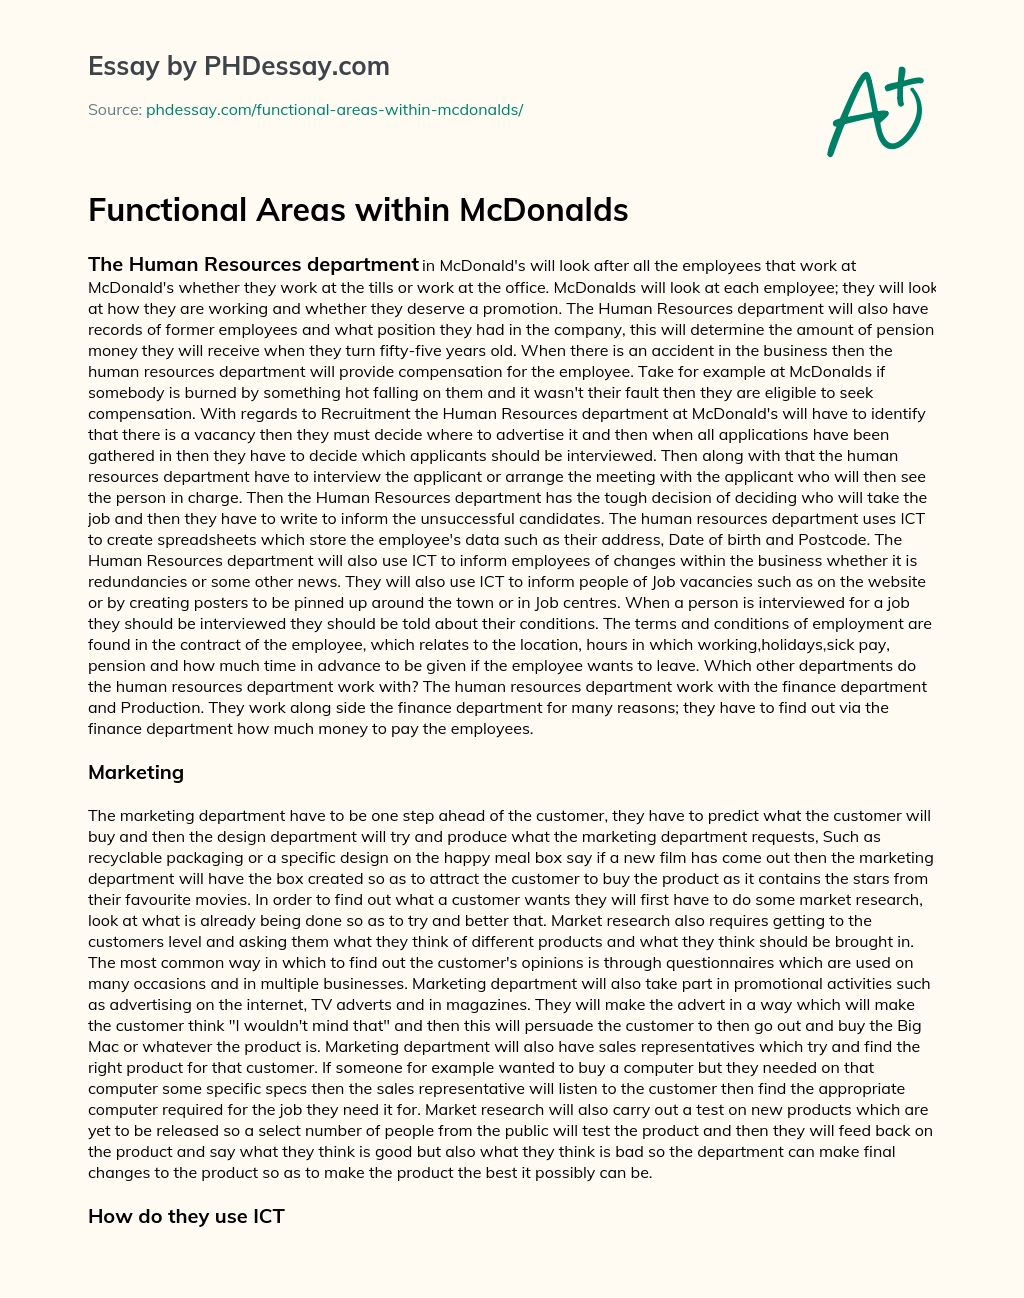 Functional Areas within McDonalds essay